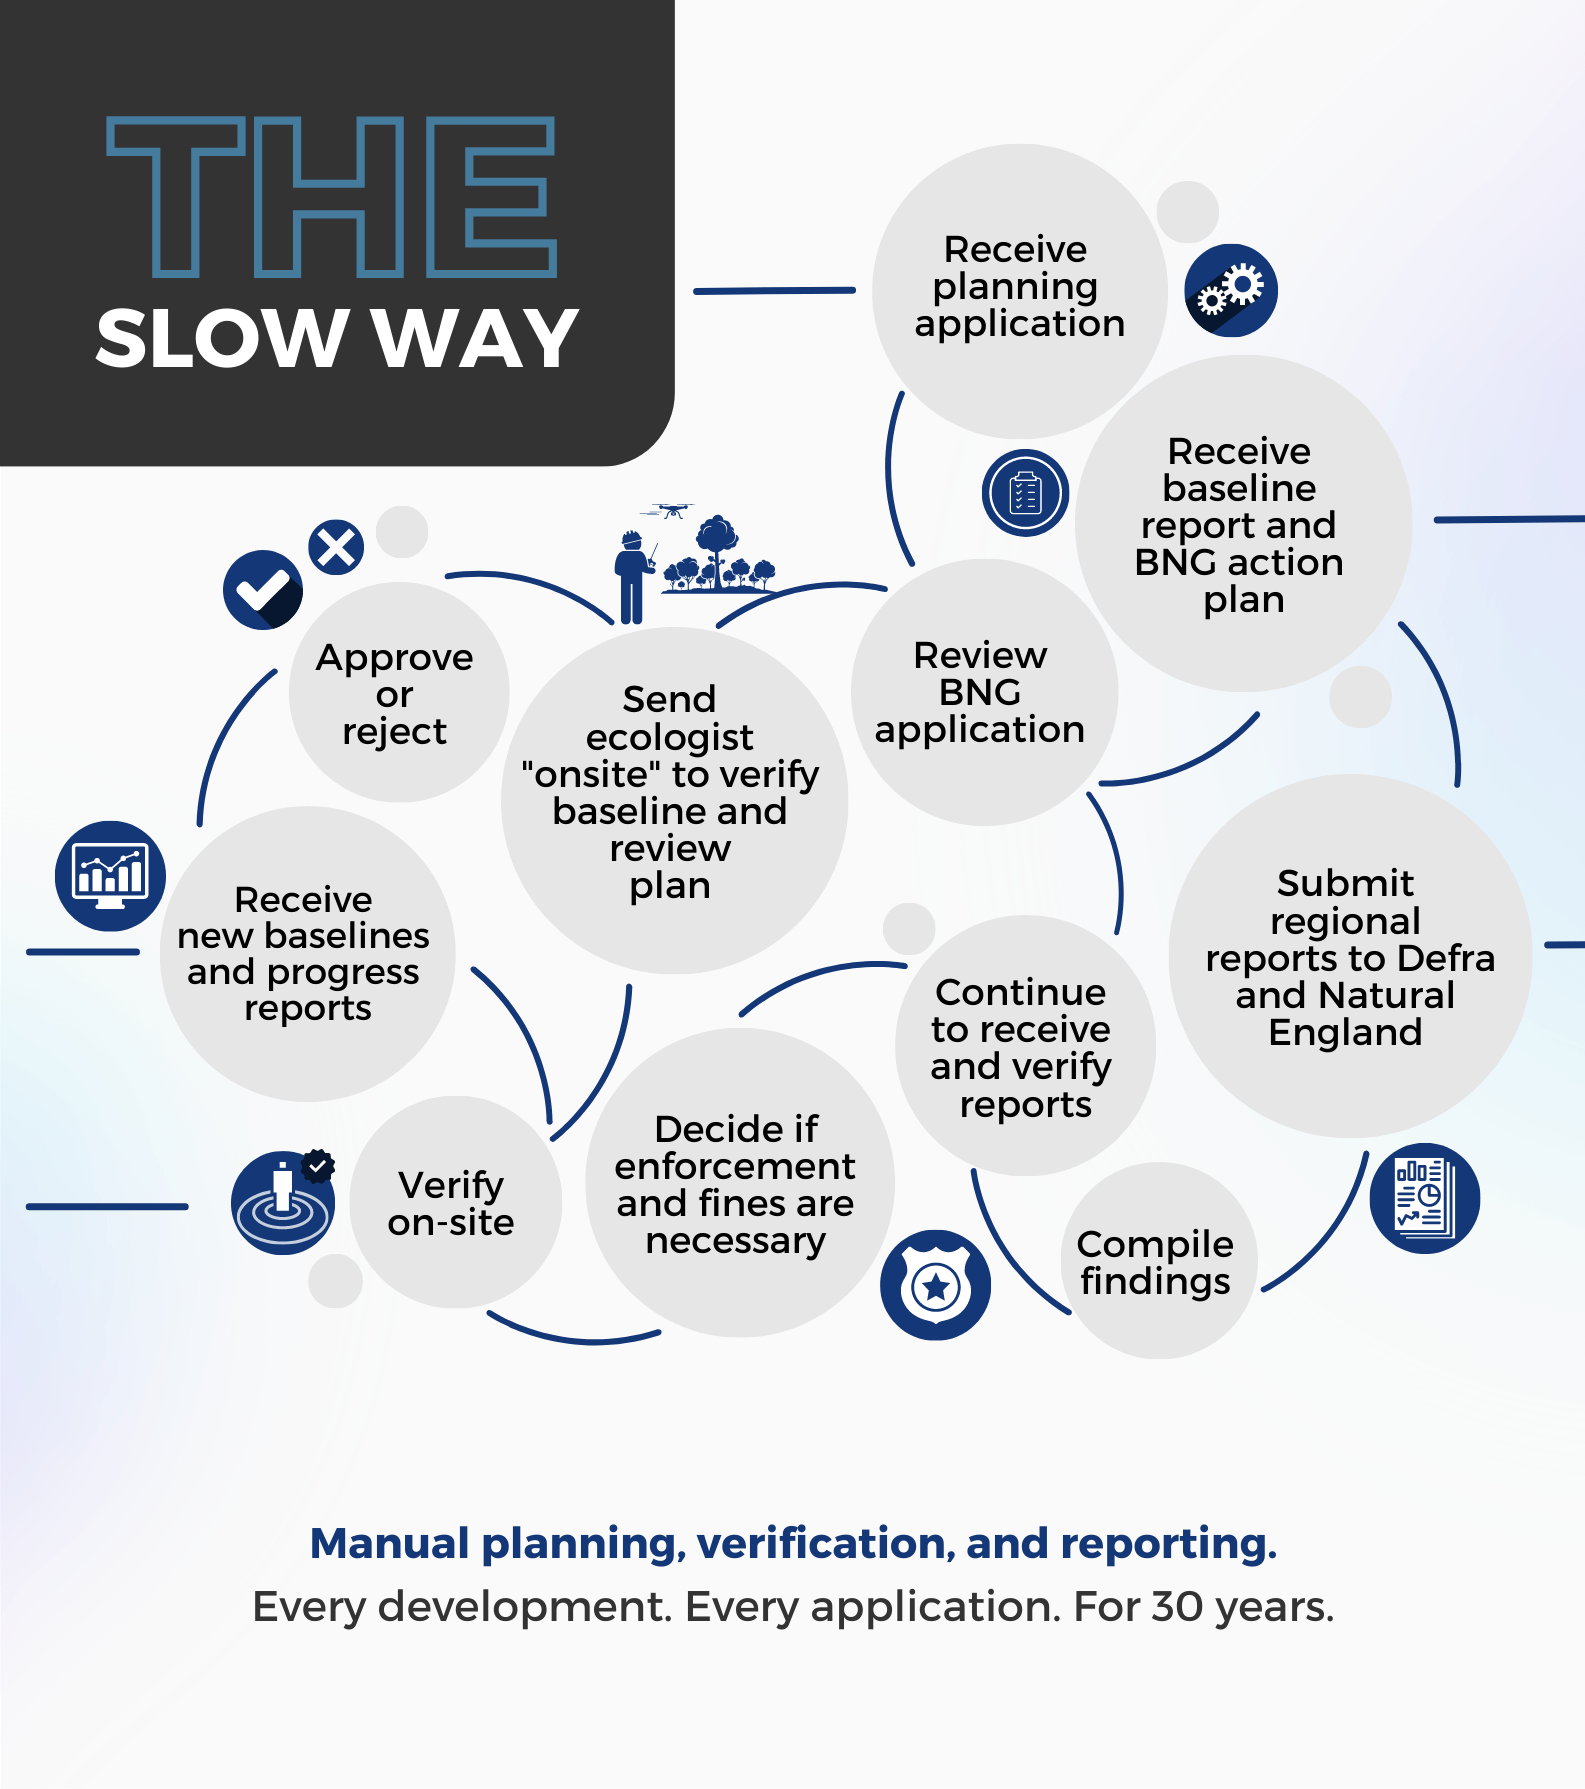 The slow way